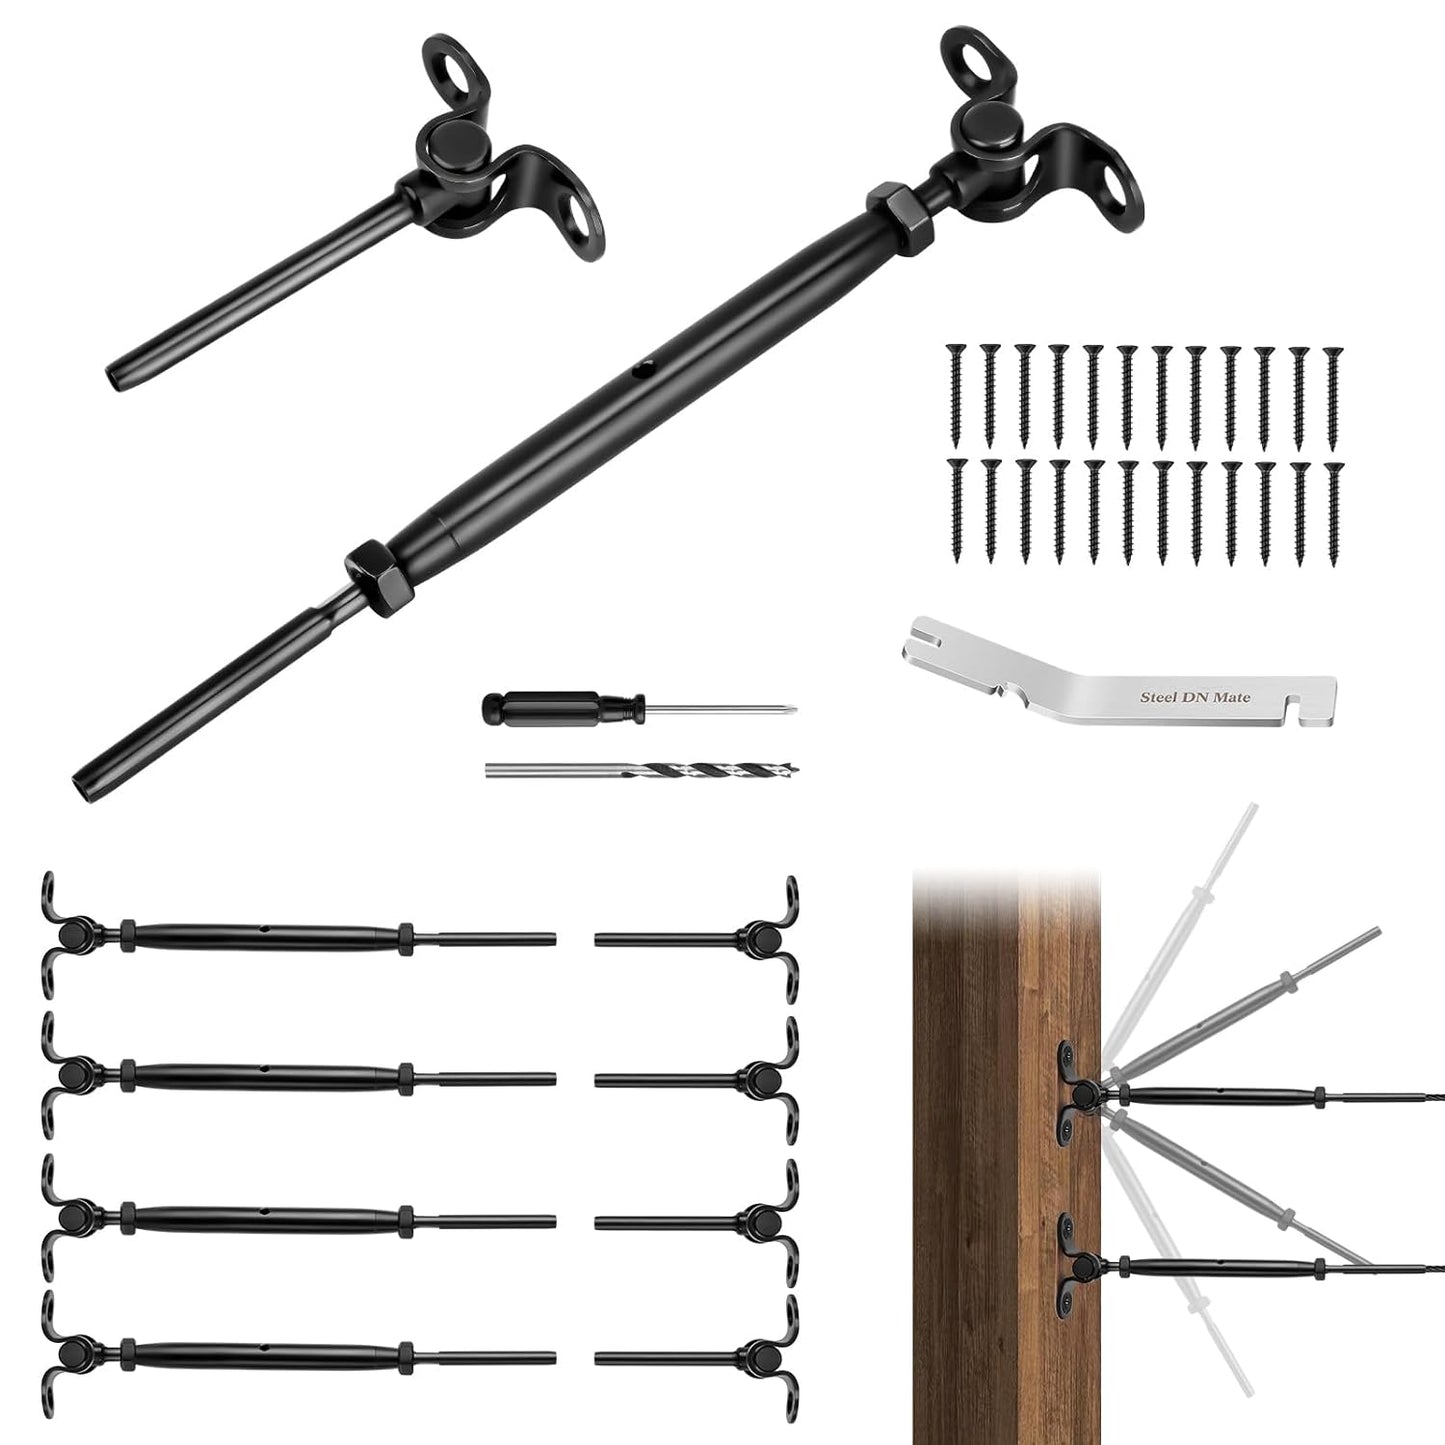 Steel DN Mate 20 Sets Cable Railing Kit Fit for 1/8" Steel Cable, Swage Toggle Turnbuckle & End Fitting, Angle 180°Adjustable Deck Cable Railing Hardware for Wood Post,316 Stainless Steel Marine Grade